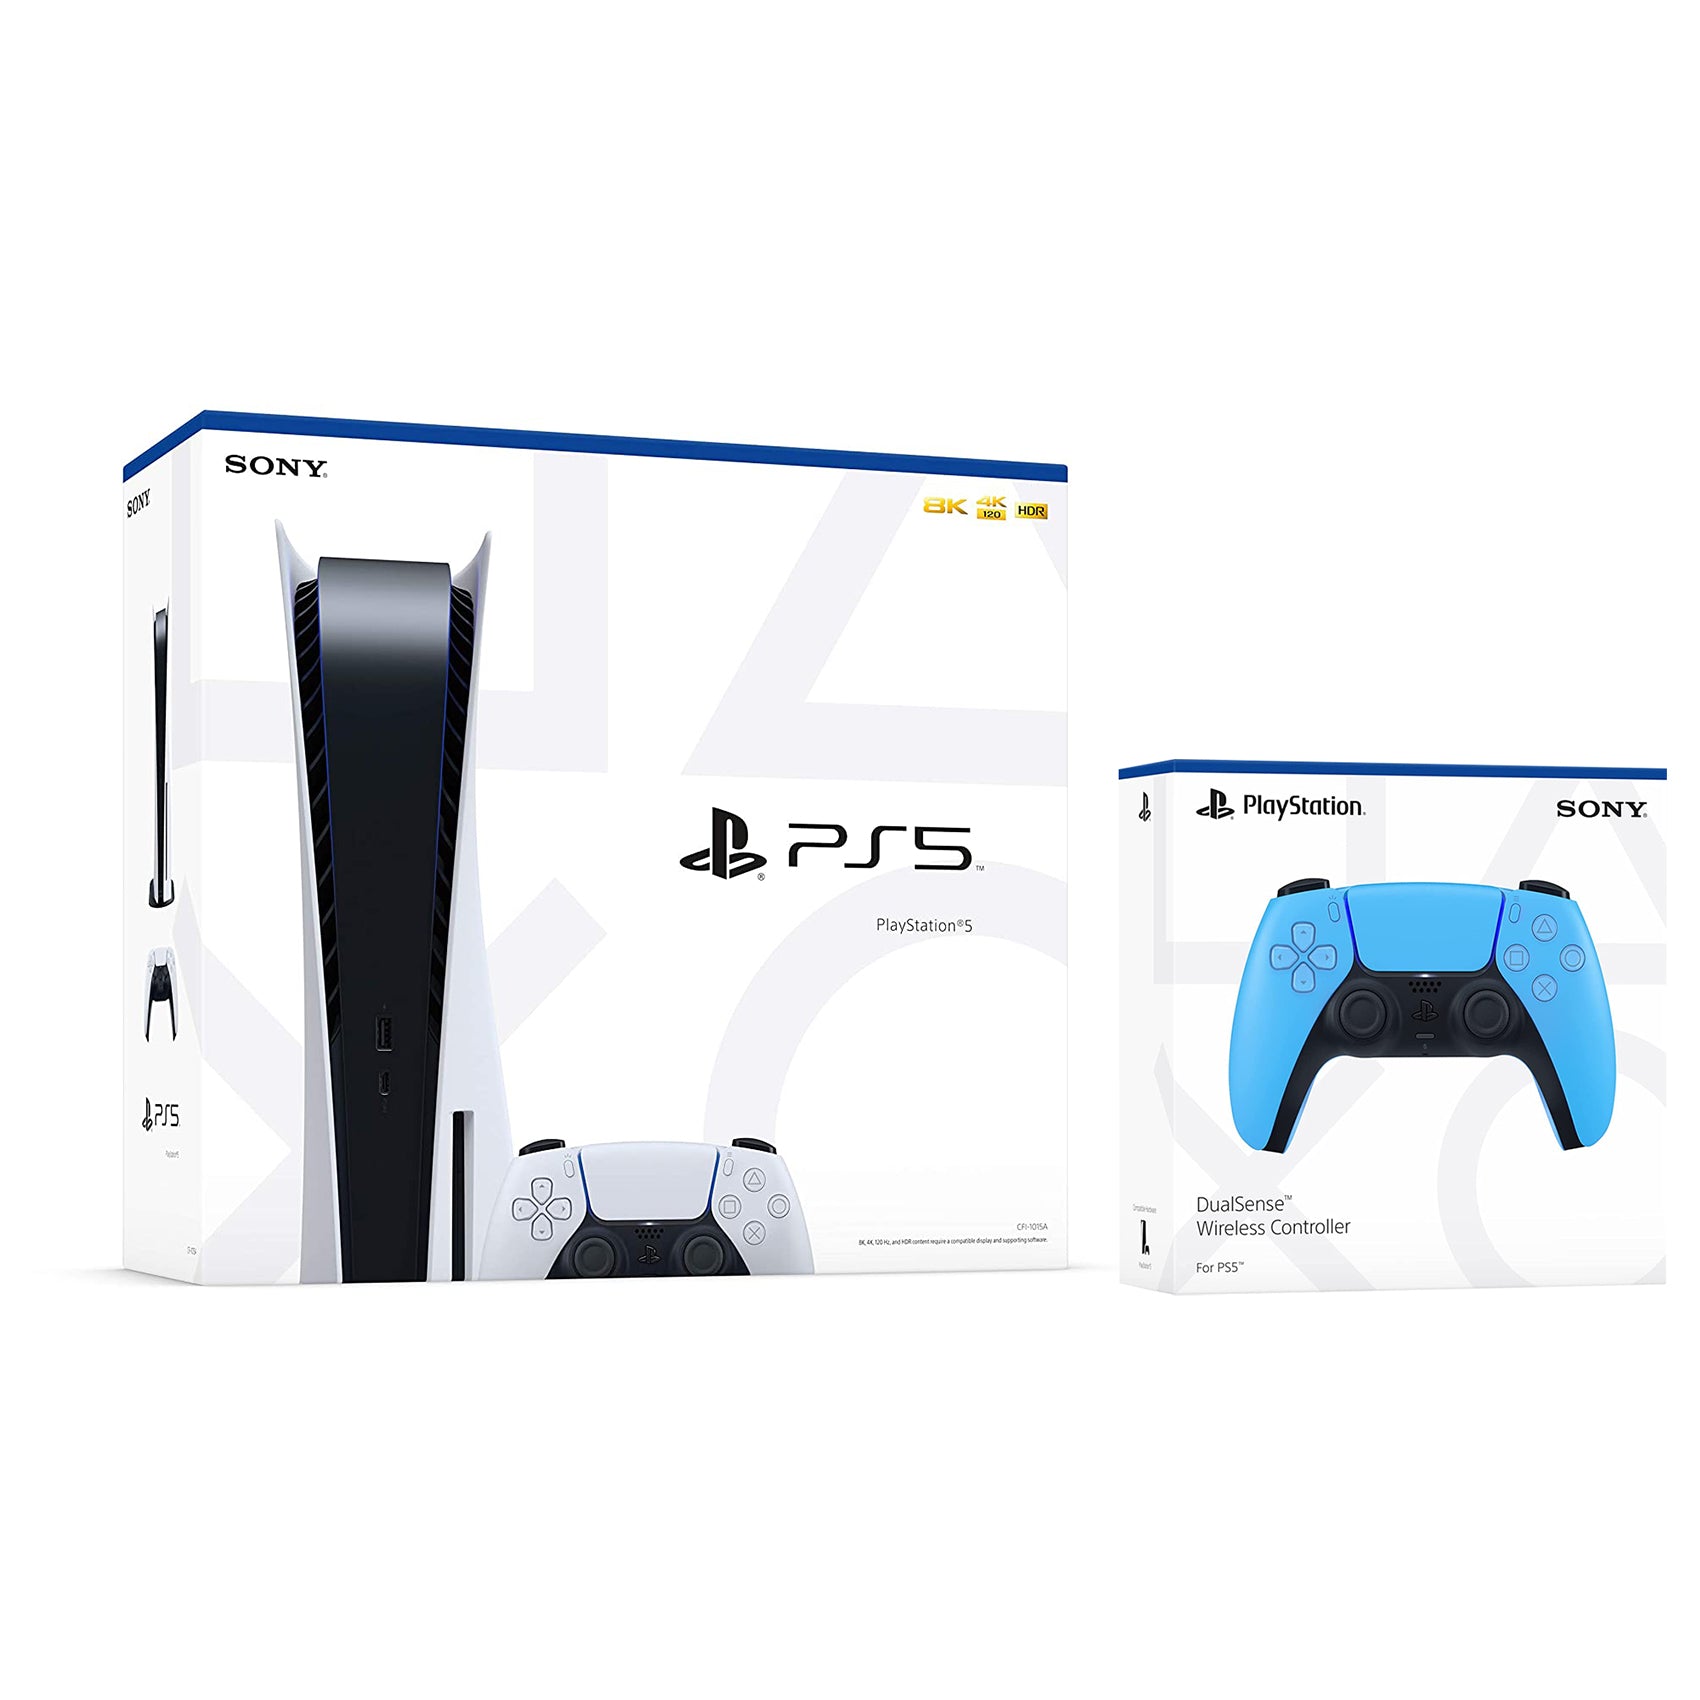 Sony Playstation 5 Disc Version (Sony PS5 Disc) with Extra Starlight Blue Controller and Black PULSE 3D Headset Bundle - Pro-Distributing